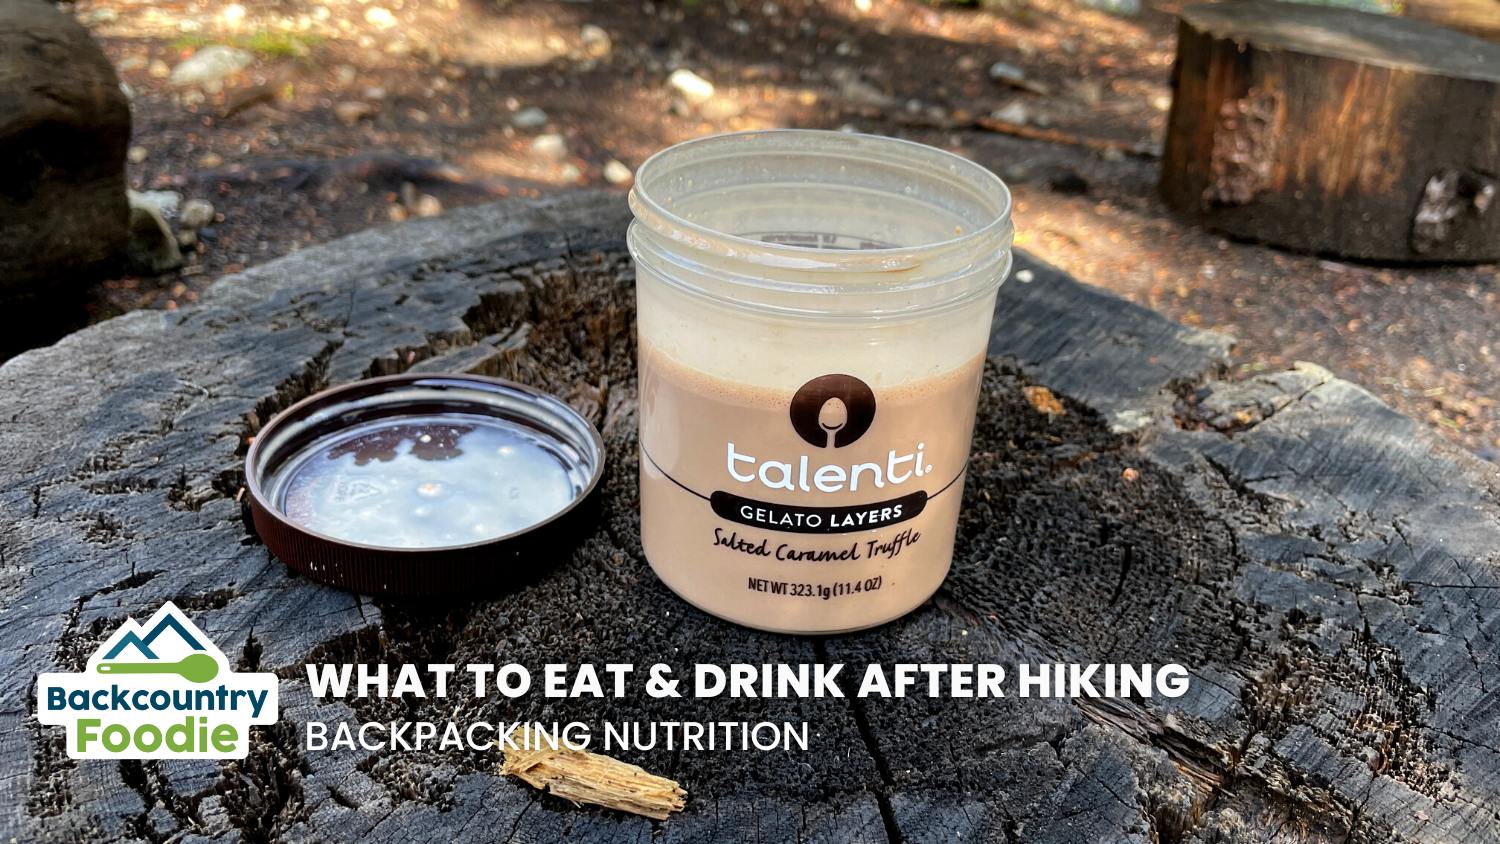 Backcountry Foodie What to Eat and Drink After Hiking blog post cover image